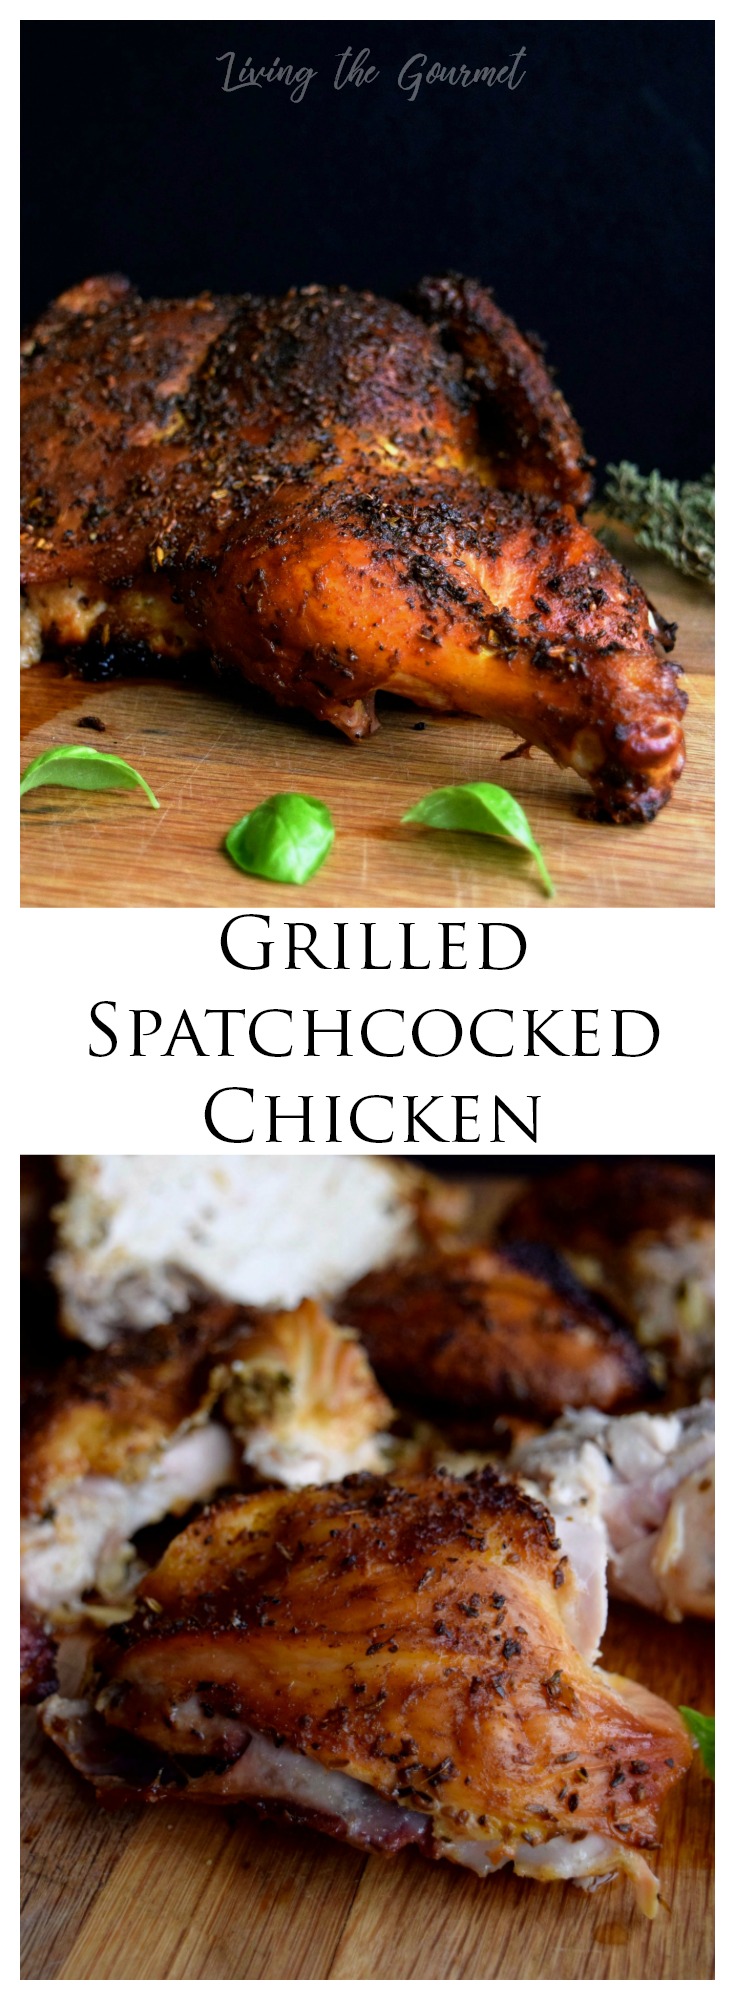 Living the Gourmet: Spatchcocked Chicken is a simple technique that will guarantee a perfectly cooked chicken throughout. Grill it up on the BBQ for a delicious and easy meal.